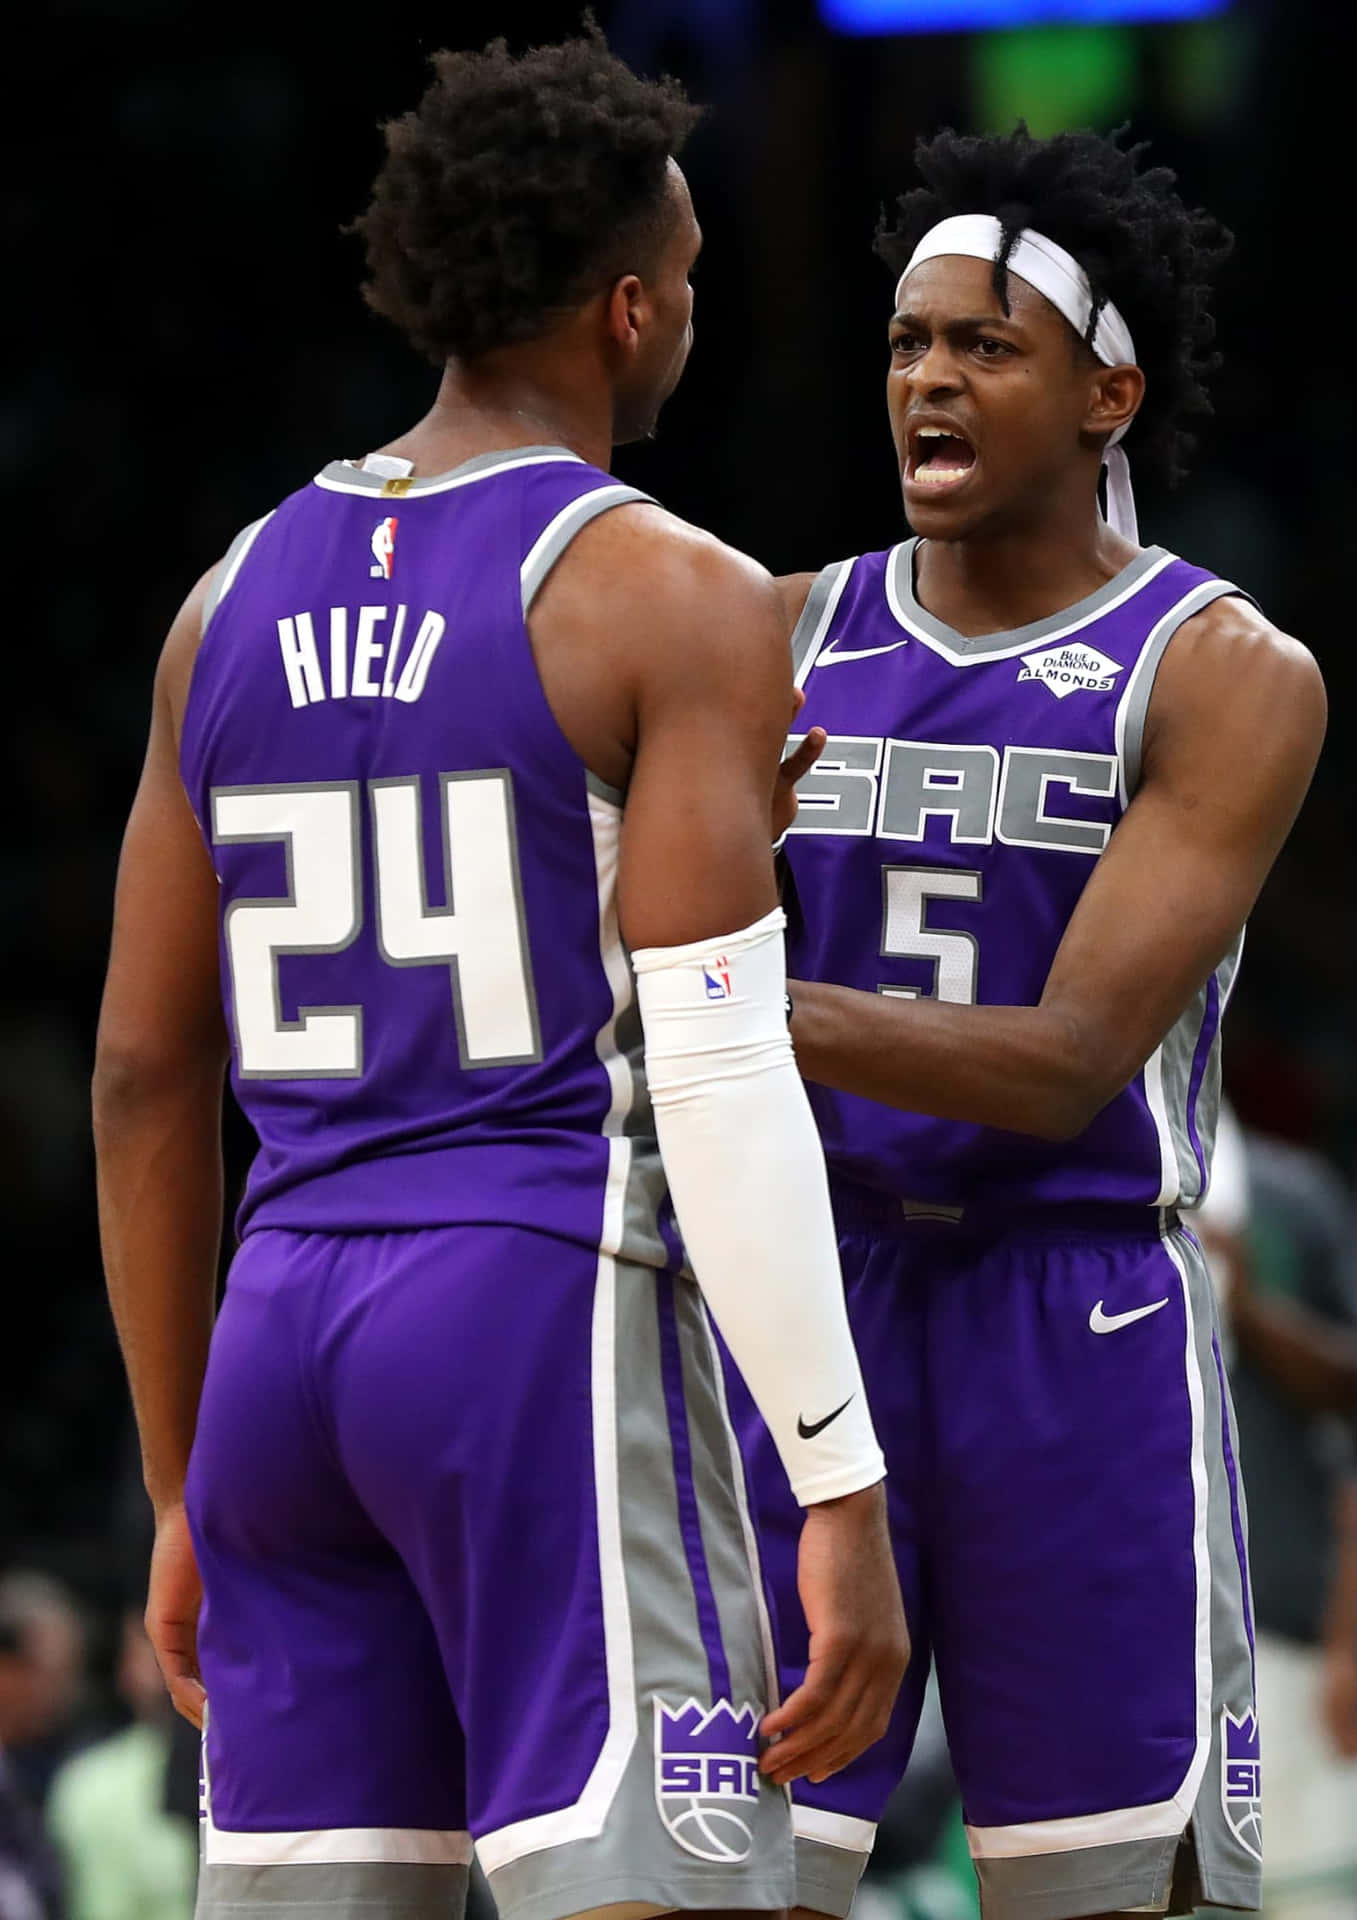 Thought…players decide the game” - De'Aaron Fox deletes